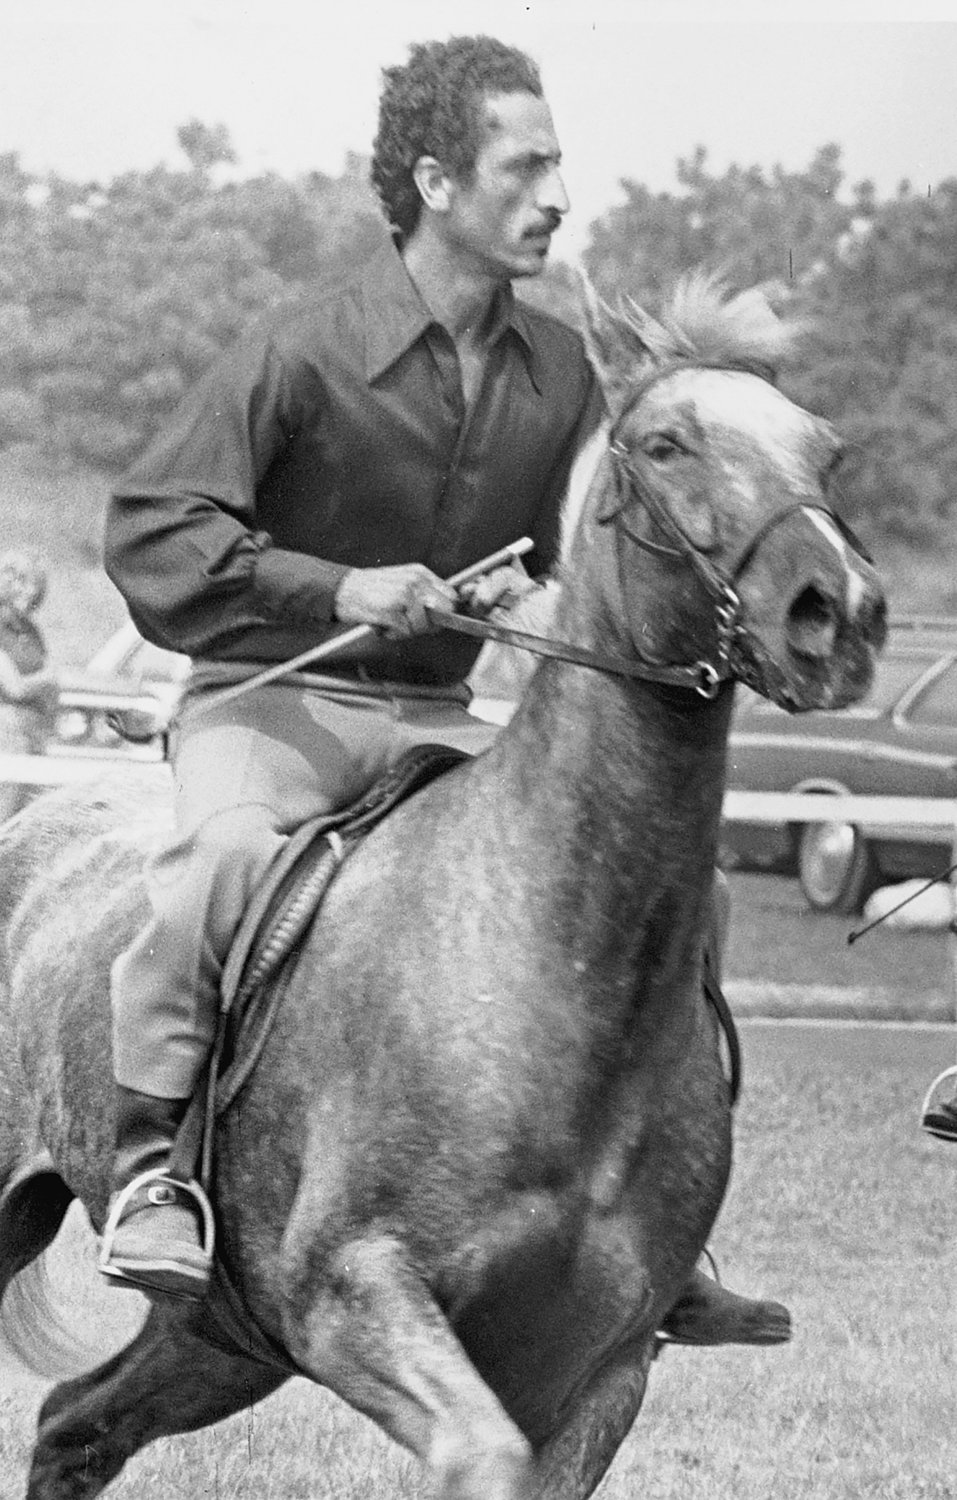 Augusto "Augie" Ramos astride his horse Golden Boy. Ramos was the first person of color to be elected to the Nantucket Board of Selectmen in 1989.